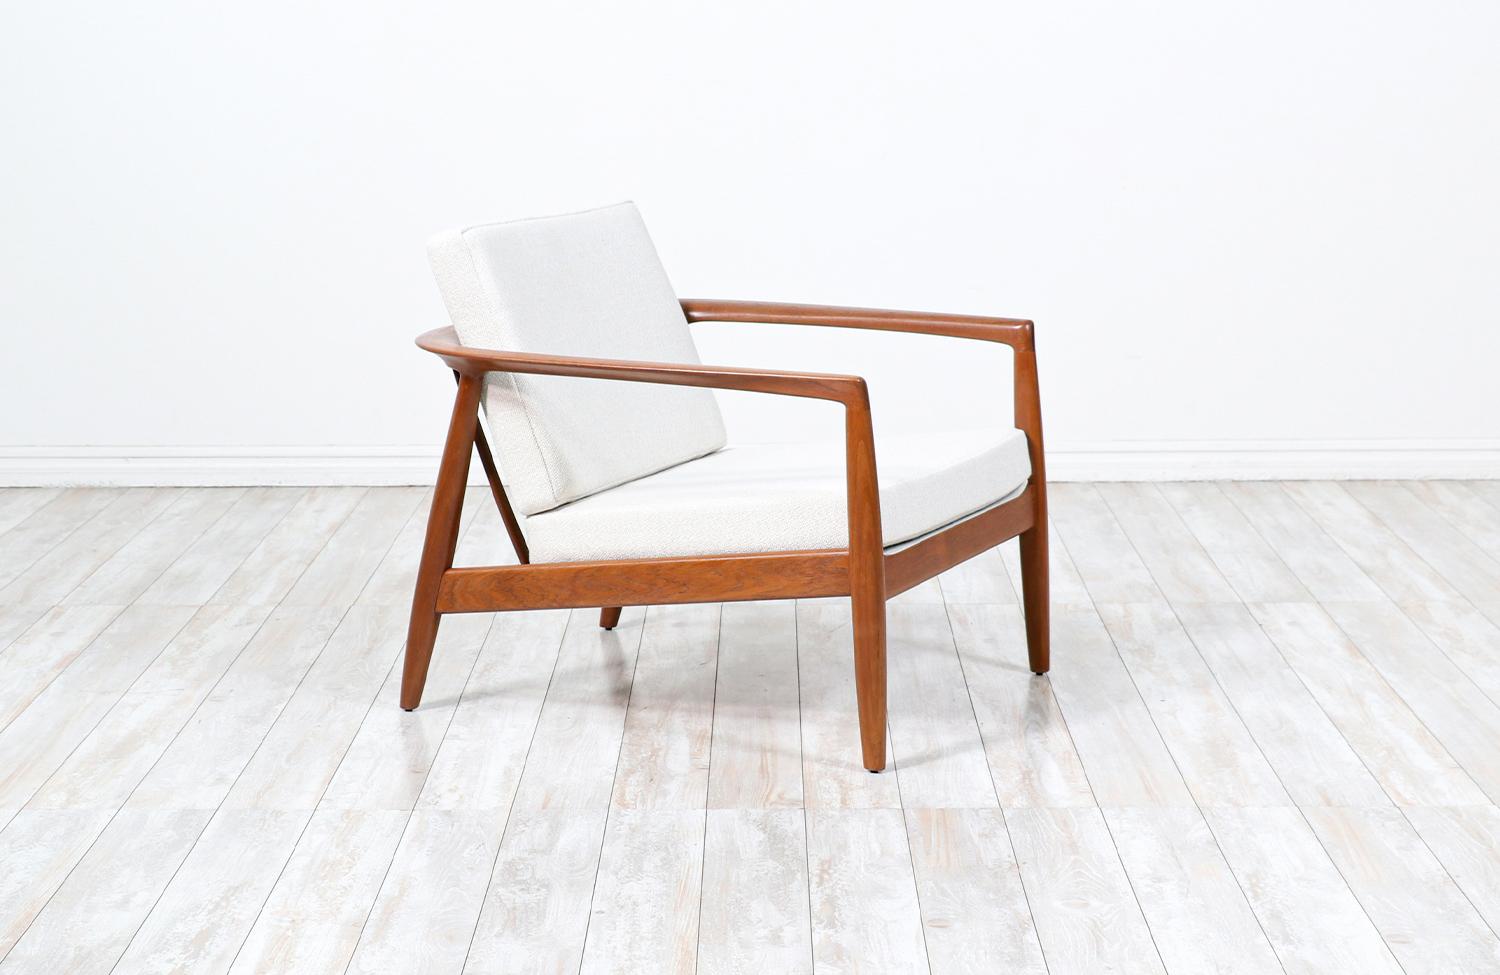 Elegant modern Model 72-C lounge chair designed by Folke Ohlsson for Dux of Sweden circa 1950s. This sturdily constructed lounge chair features a solid teak wood frame with eight vertical slats in the open back that add support while giving it a